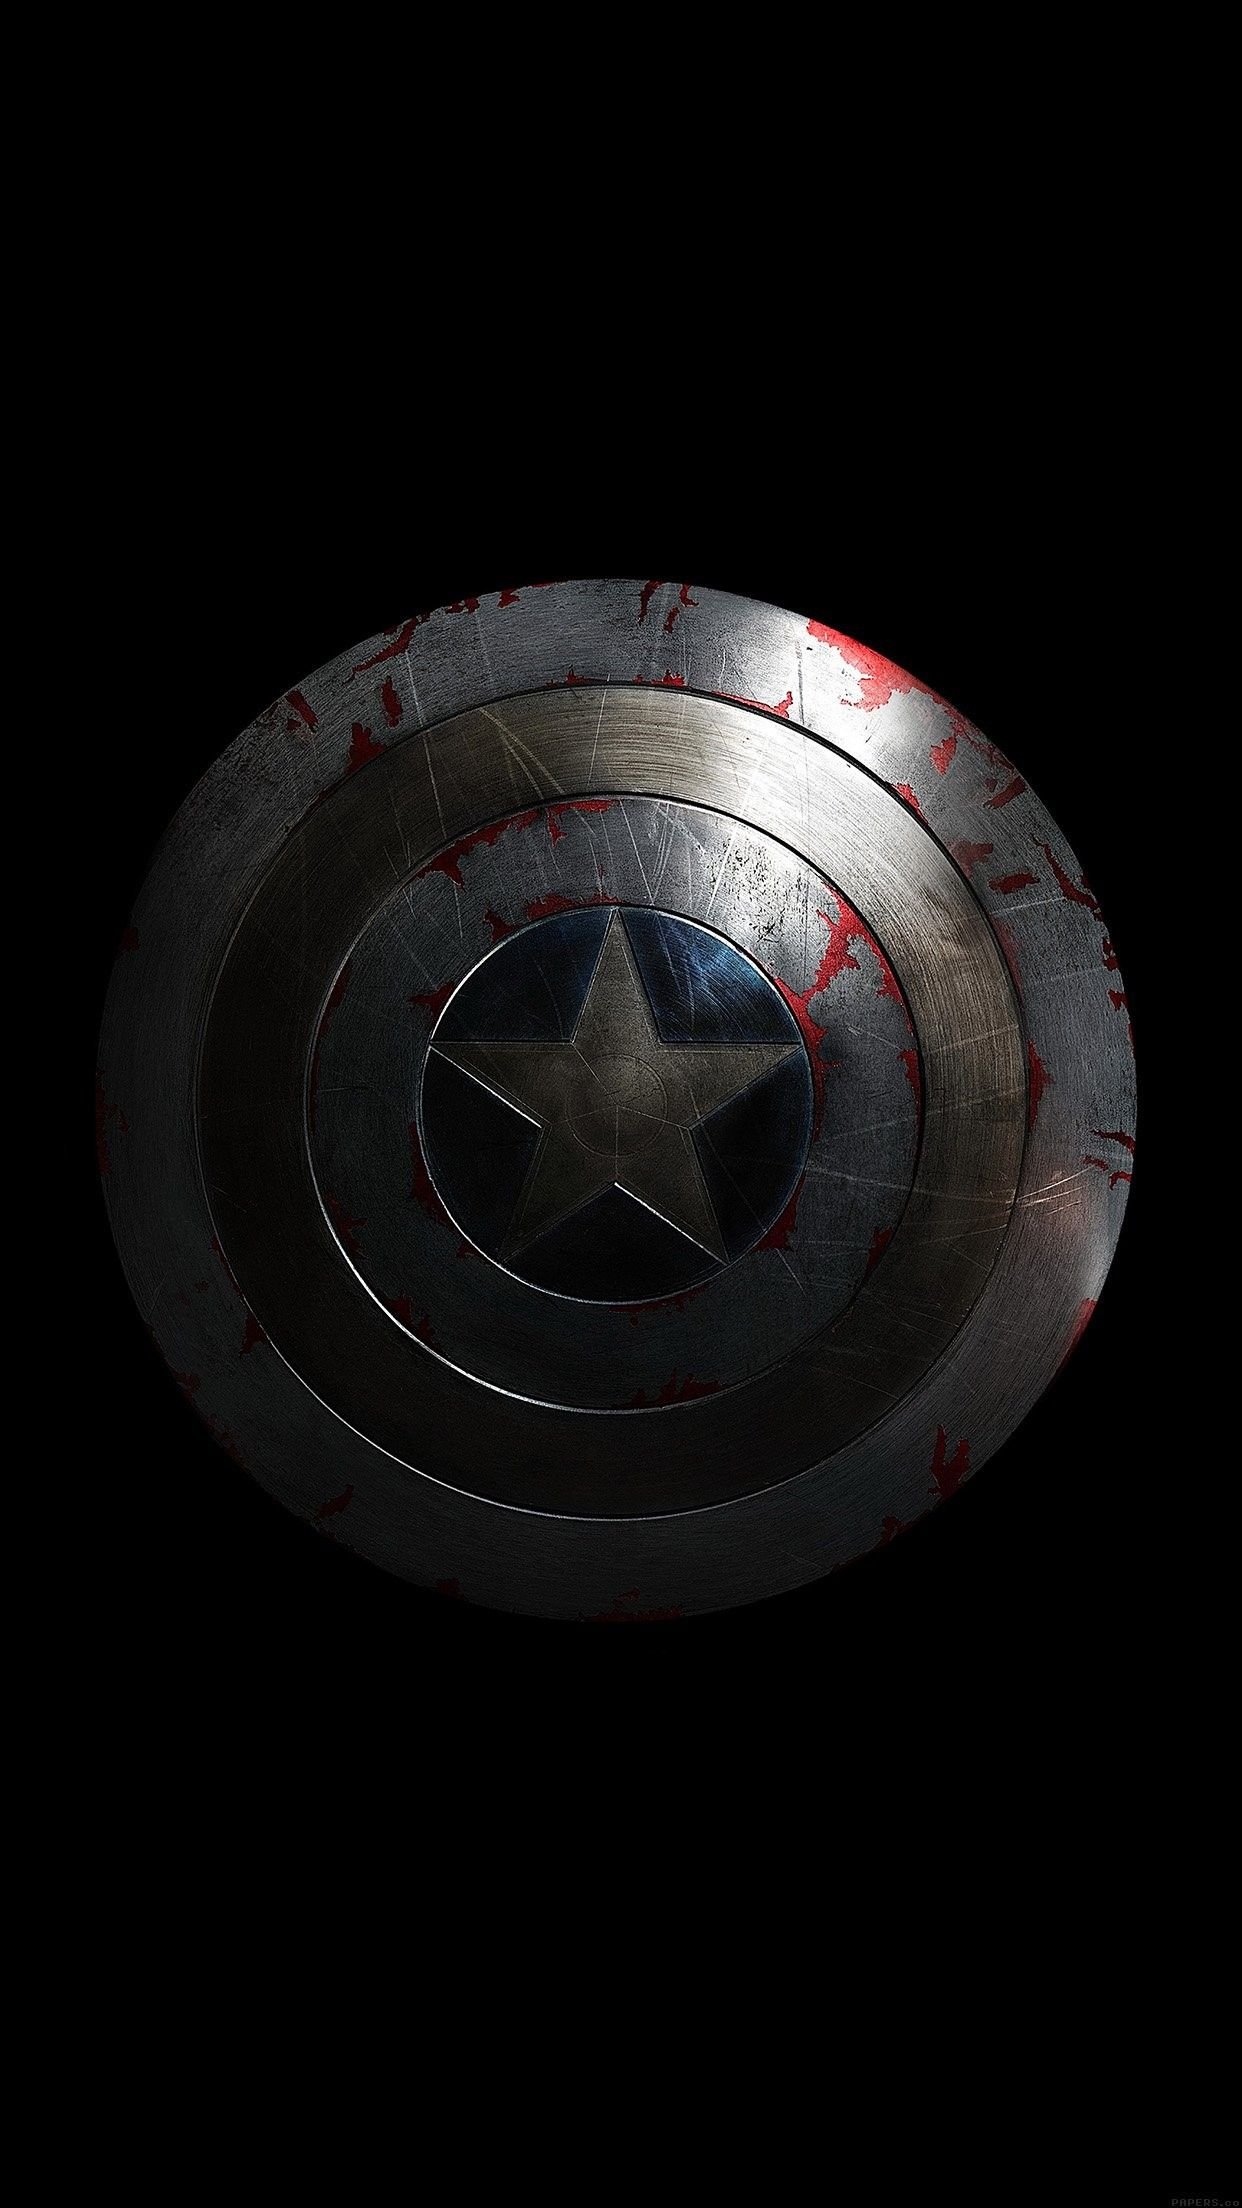 Wallpaper logo spy Marvel eagle series falcon S H I E L D  Agents of Shield tv series Marvel Agents of Shield Agents of  Shield Marvels Agents of Shield bastions of justice